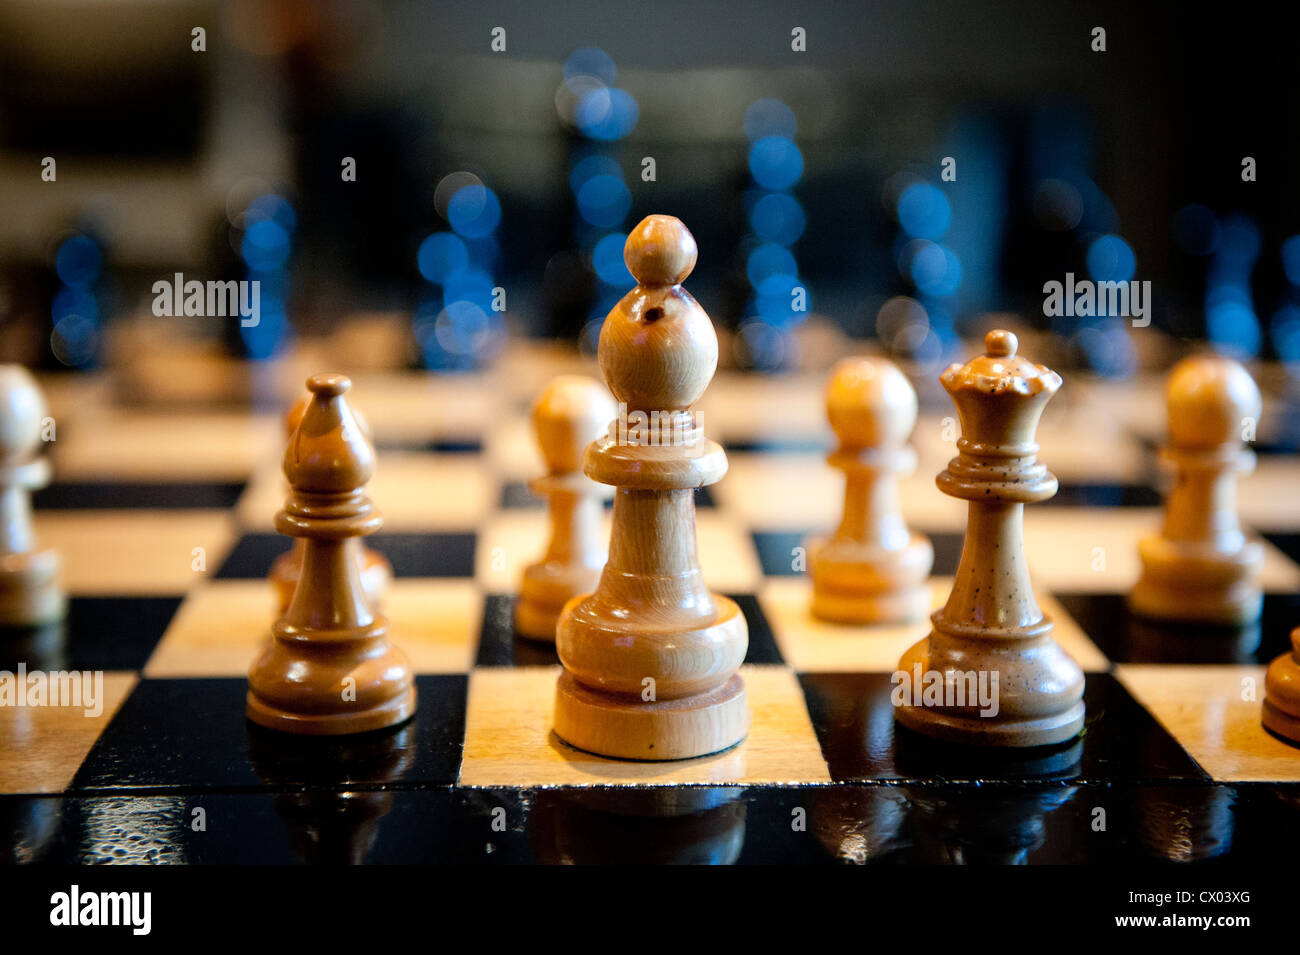 Carved wooden chess pieces on a chess board in warm light. Stock Photo